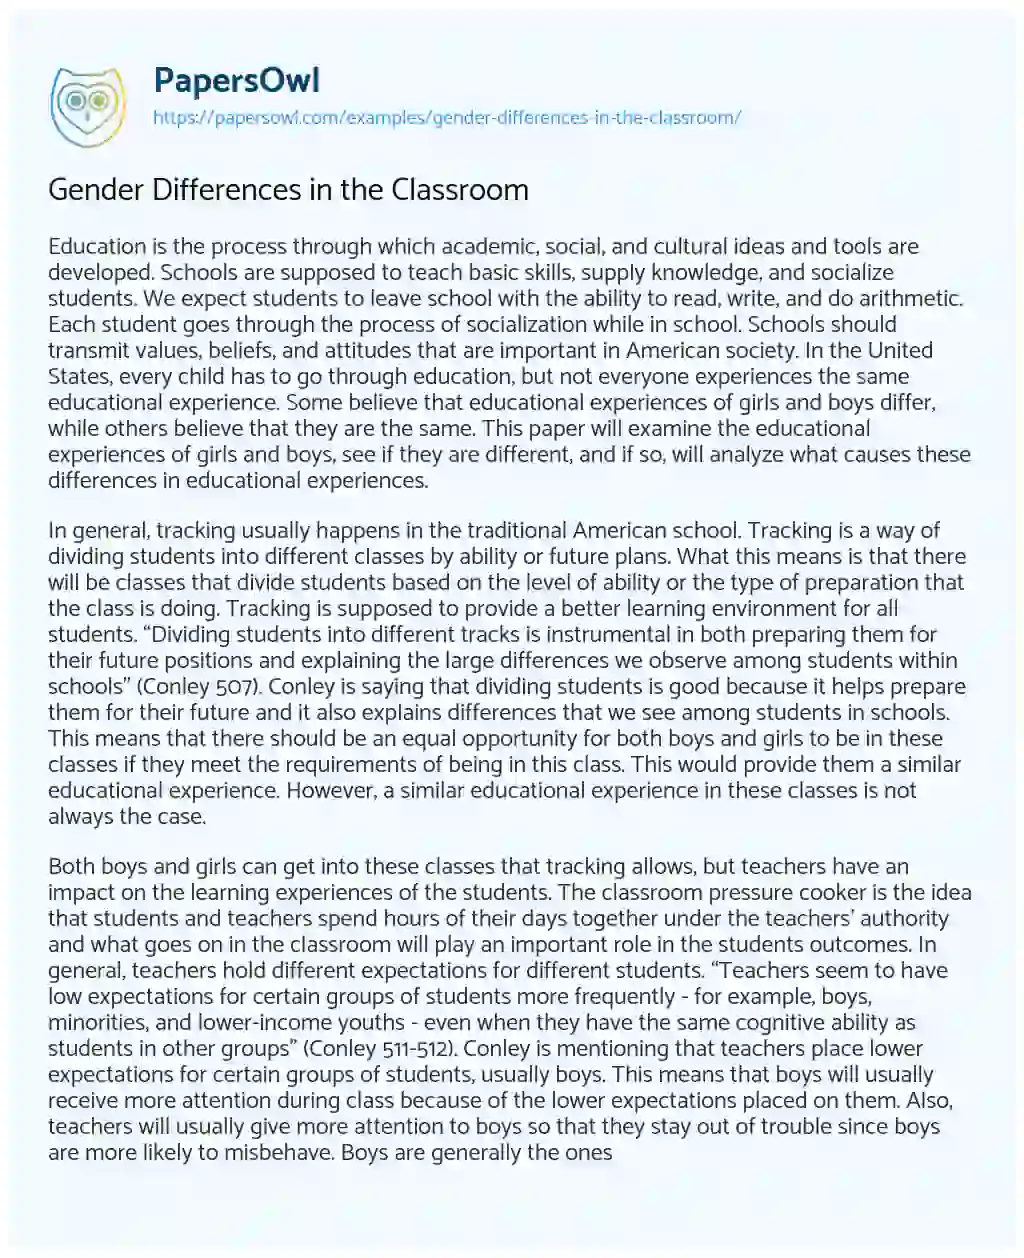 Essay on Gender Differences in the Classroom